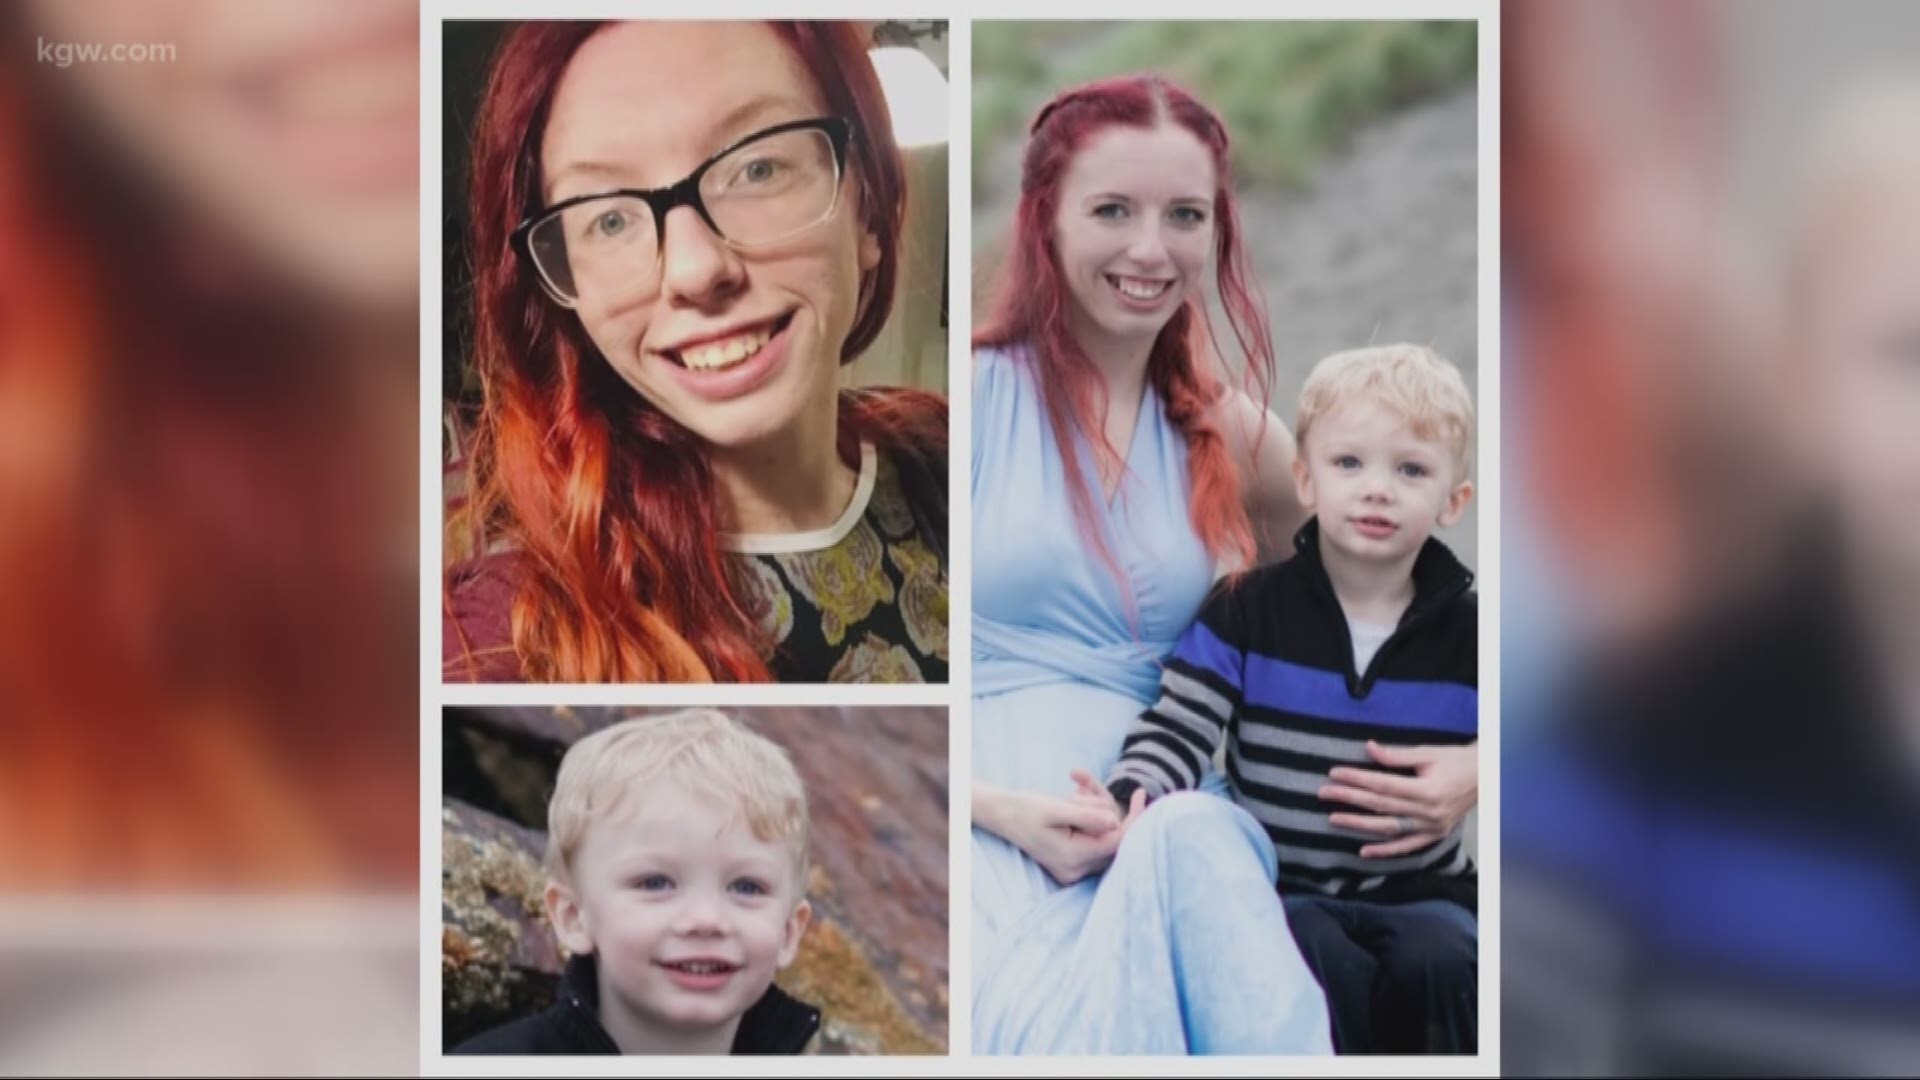 A mother and child from Salem has residents there shook, as well as the area in Yamhill County where investigators have focused their search.